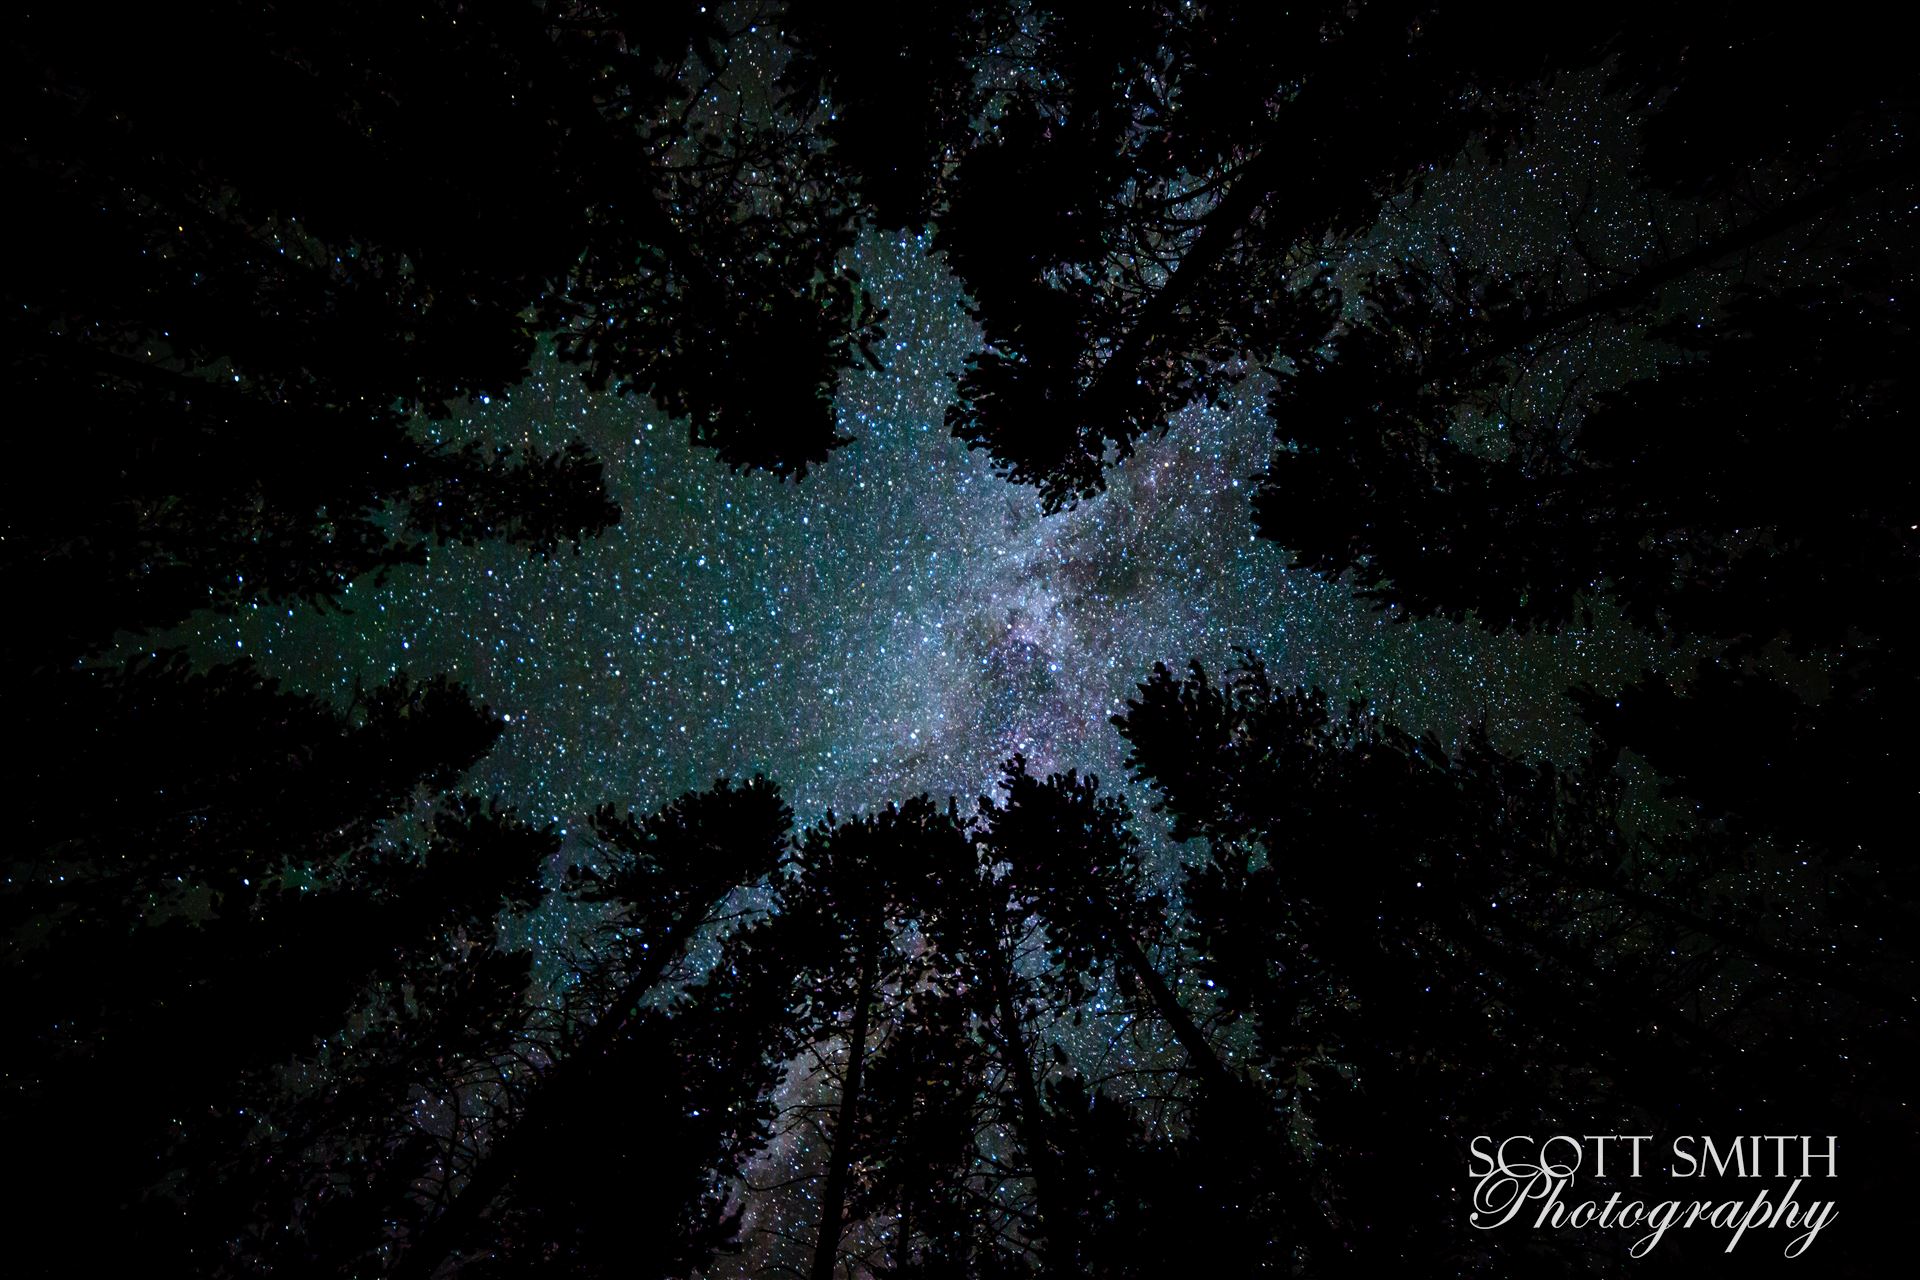 Camping with a View - Landscape - A beautiful view of the milky way from our campsite at Turquoise Lake, Leadville Colorado, adjusted for portrait view. by Scott Smith Photos